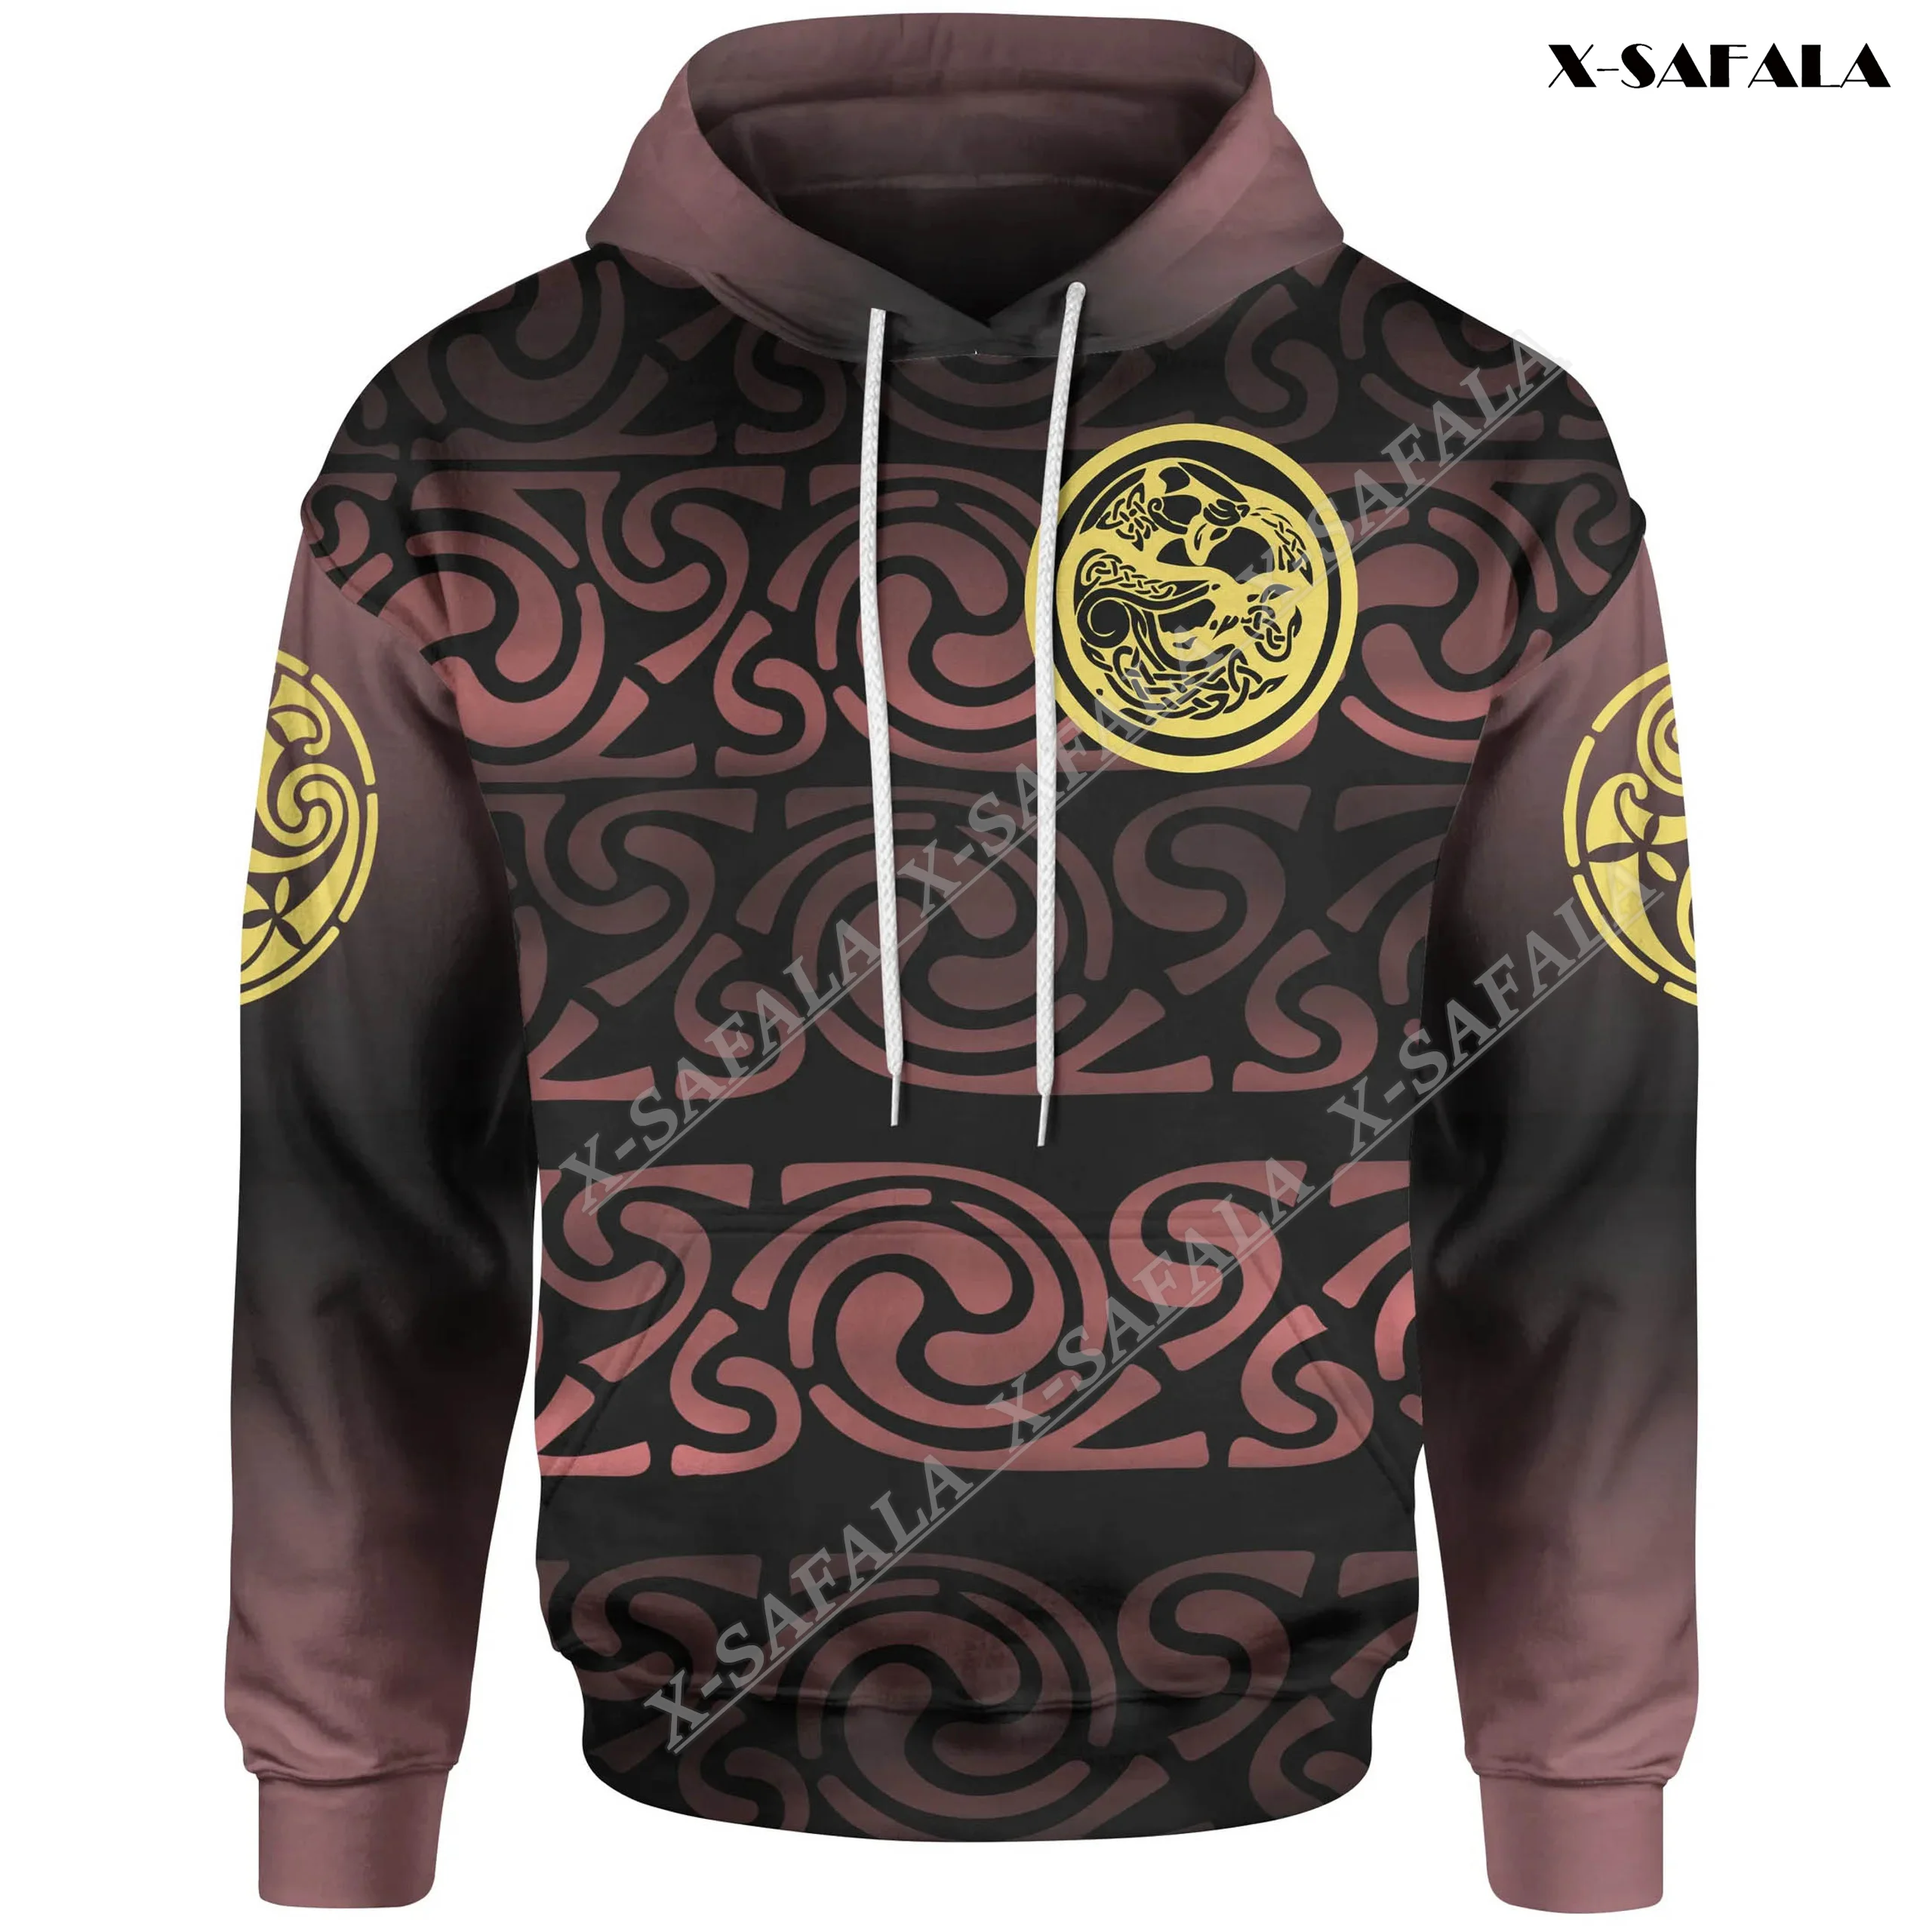 

France BRITTANY Elements Compass Flag CELTIC 3D Printed Hoodie Man Tattoo Zipper Pullover Sweatshirt Jersey Tops Tracksuits